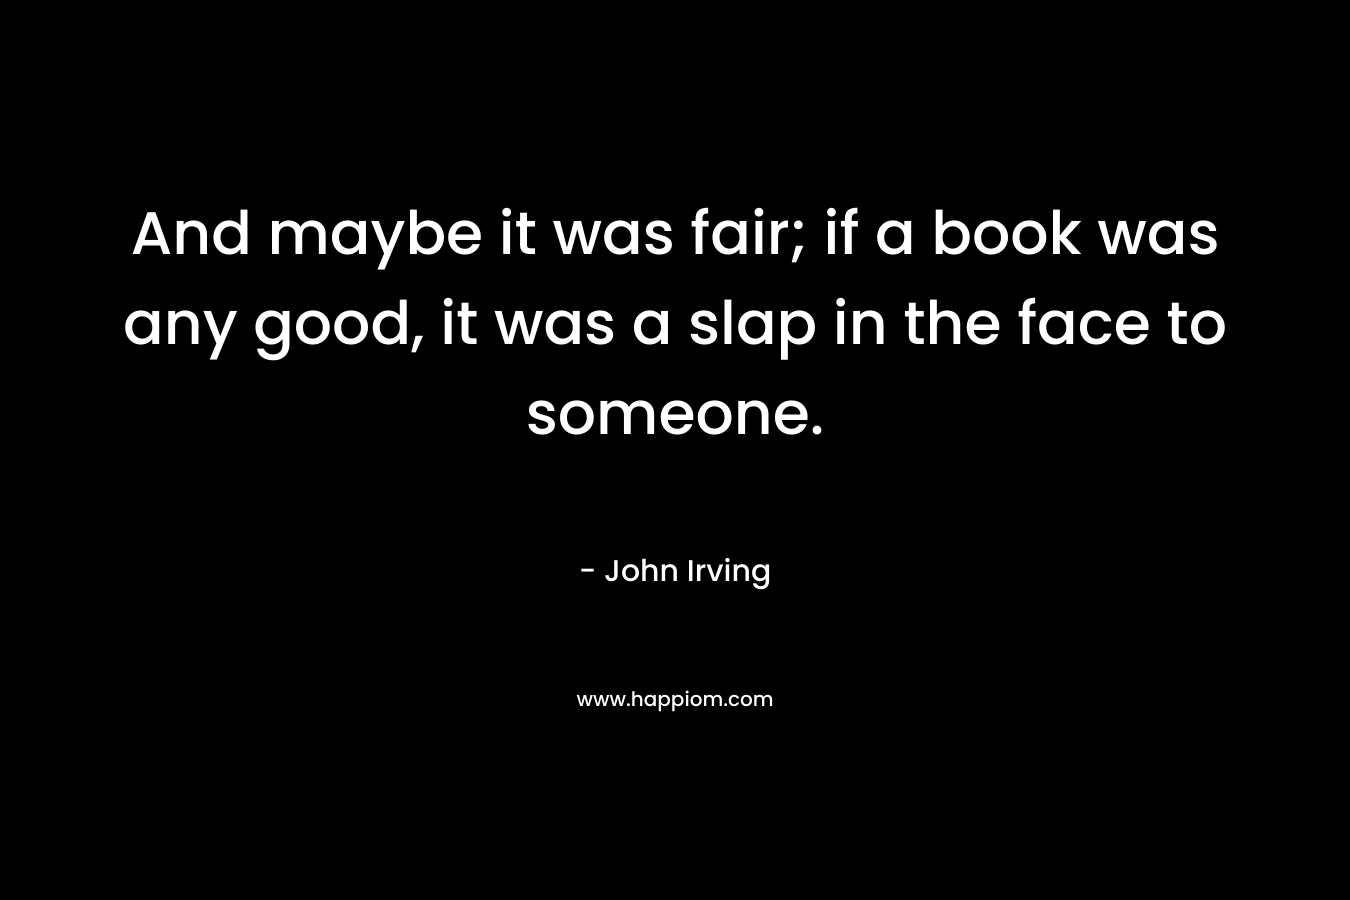 And maybe it was fair; if a book was any good, it was a slap in the face to someone.